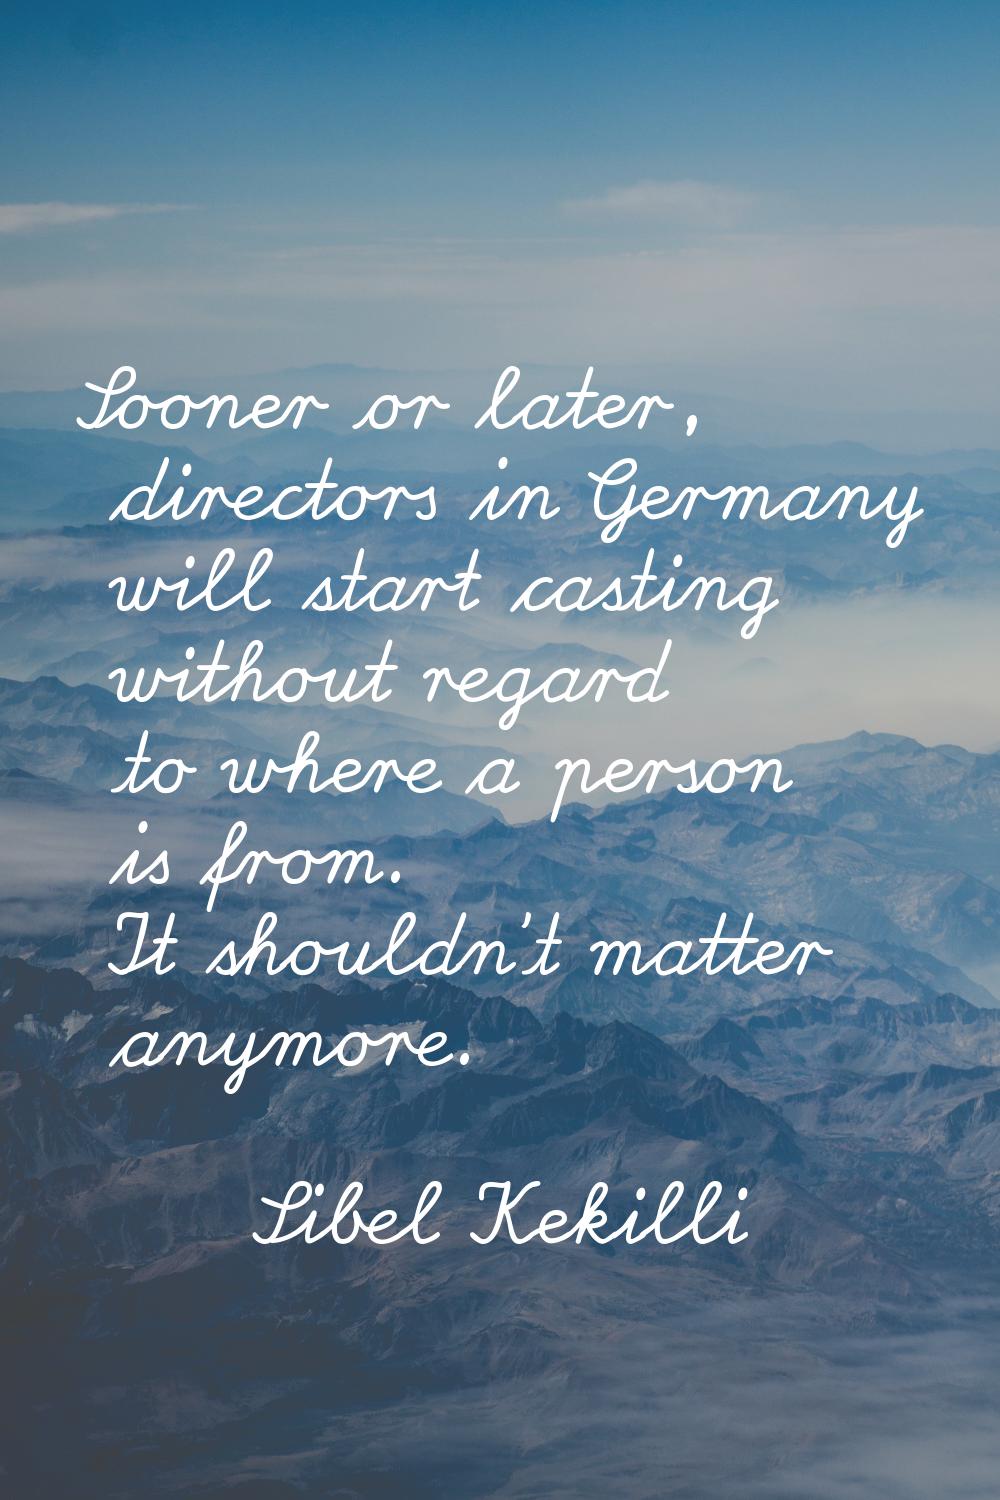 Sooner or later, directors in Germany will start casting without regard to where a person is from. 